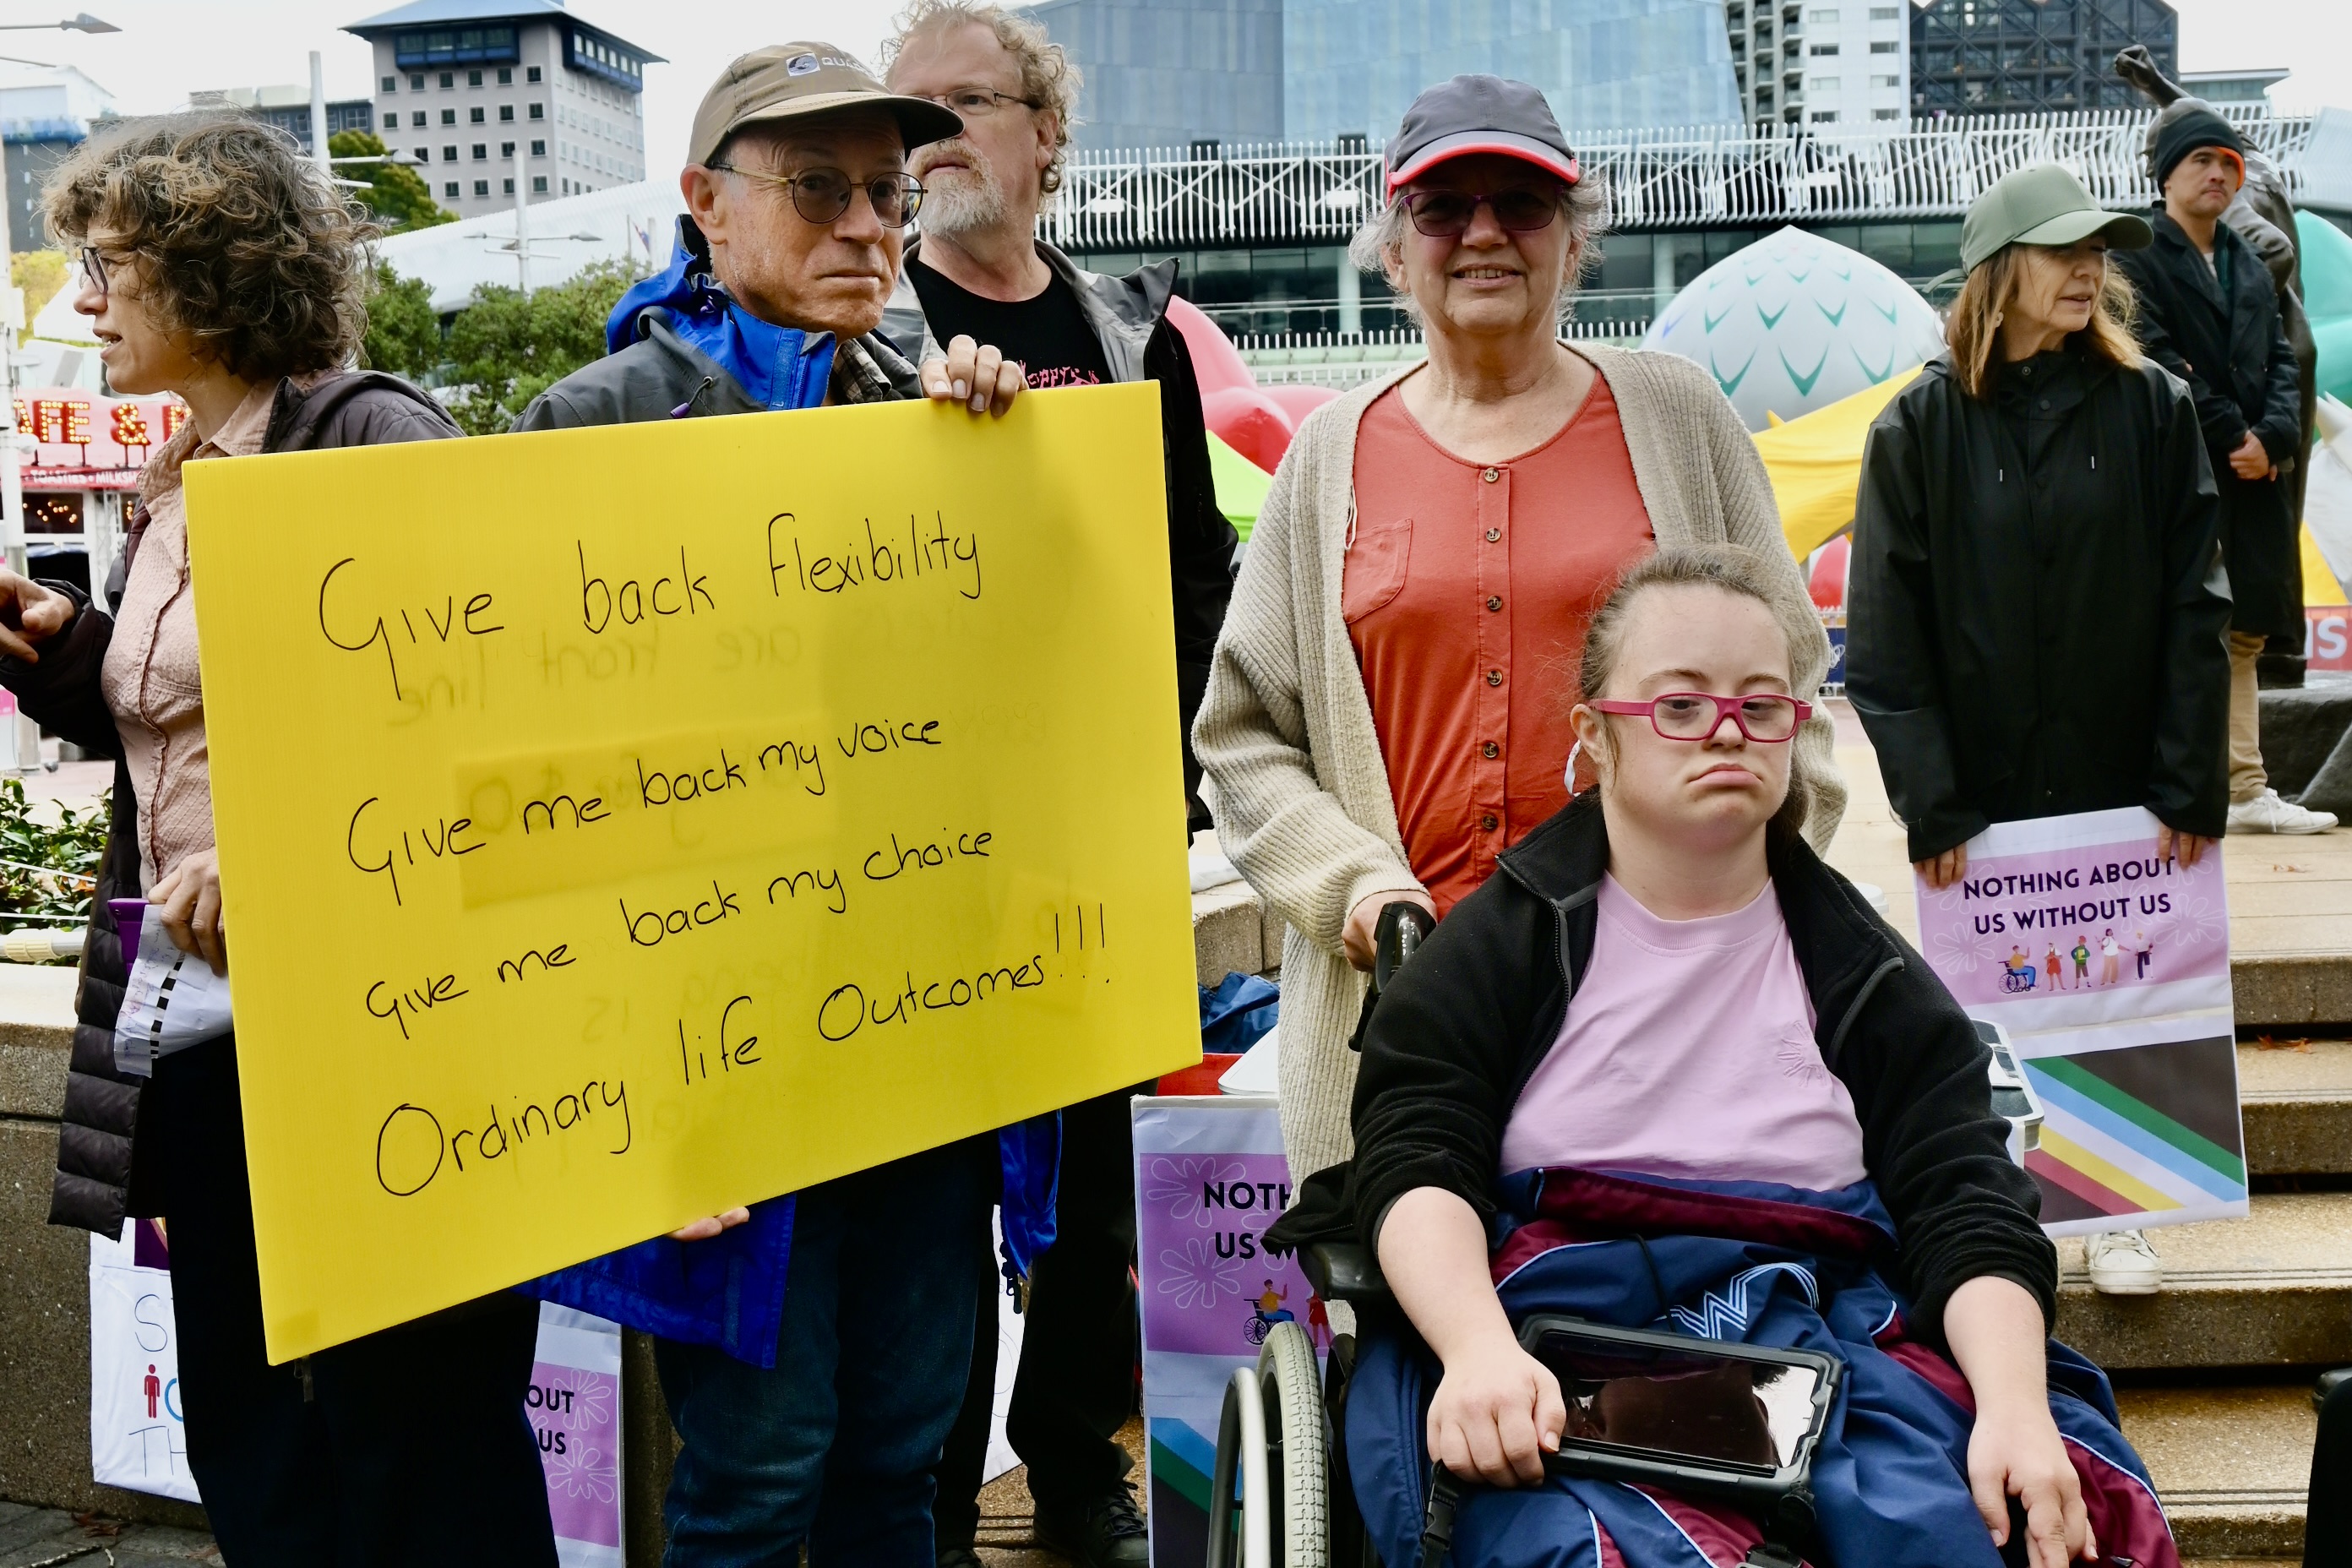 A family with a young woman in a wheelchair hold up a sign that reads: Give back flexibility, give me back my voice, give me back my choice, ordinary life outcomes!!!